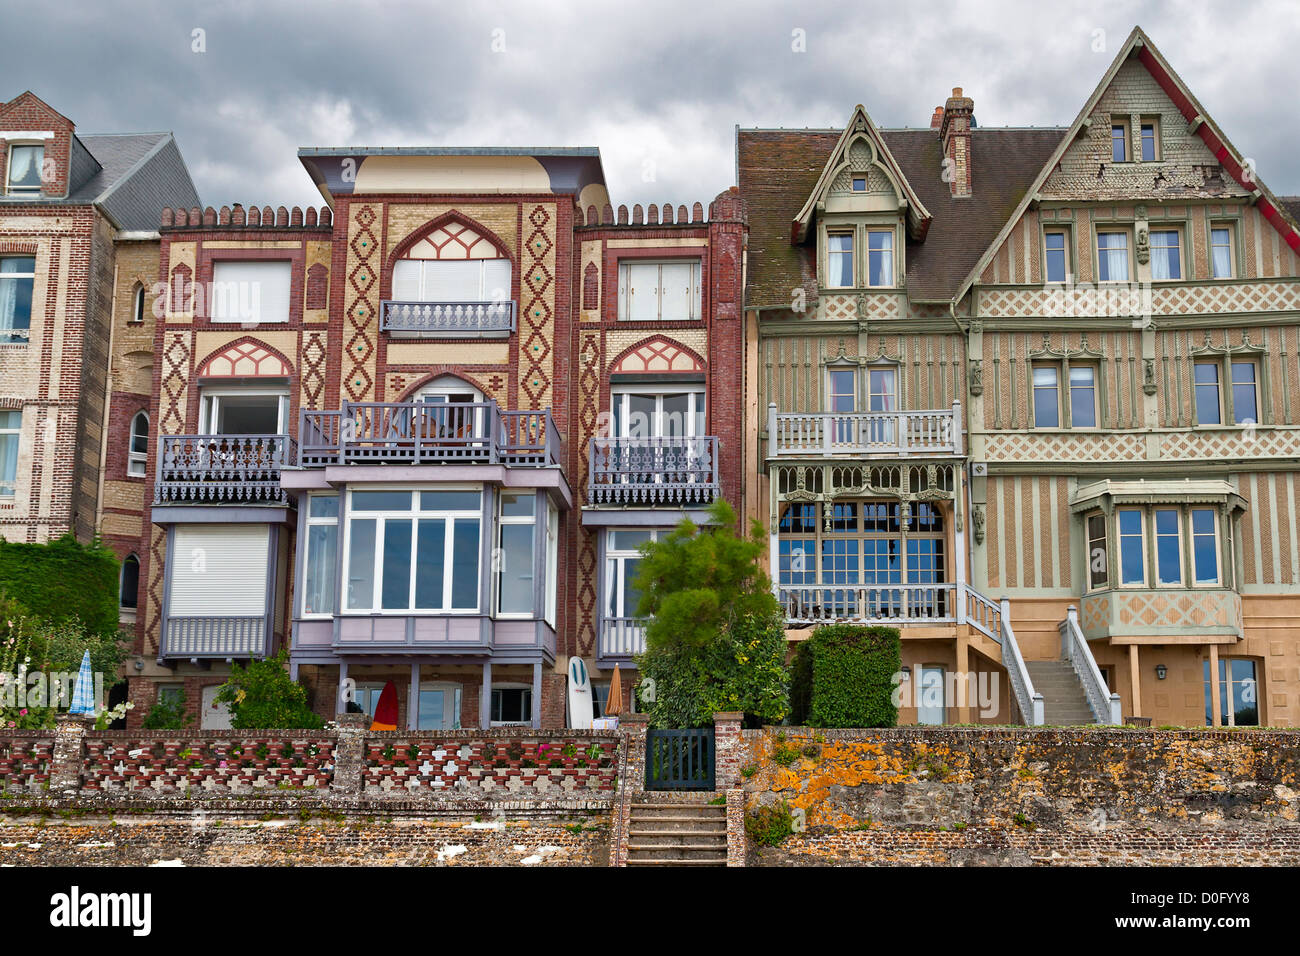 Typical neonormand style houses in Trouville-sur-Mer, normandy, France Stock Photo